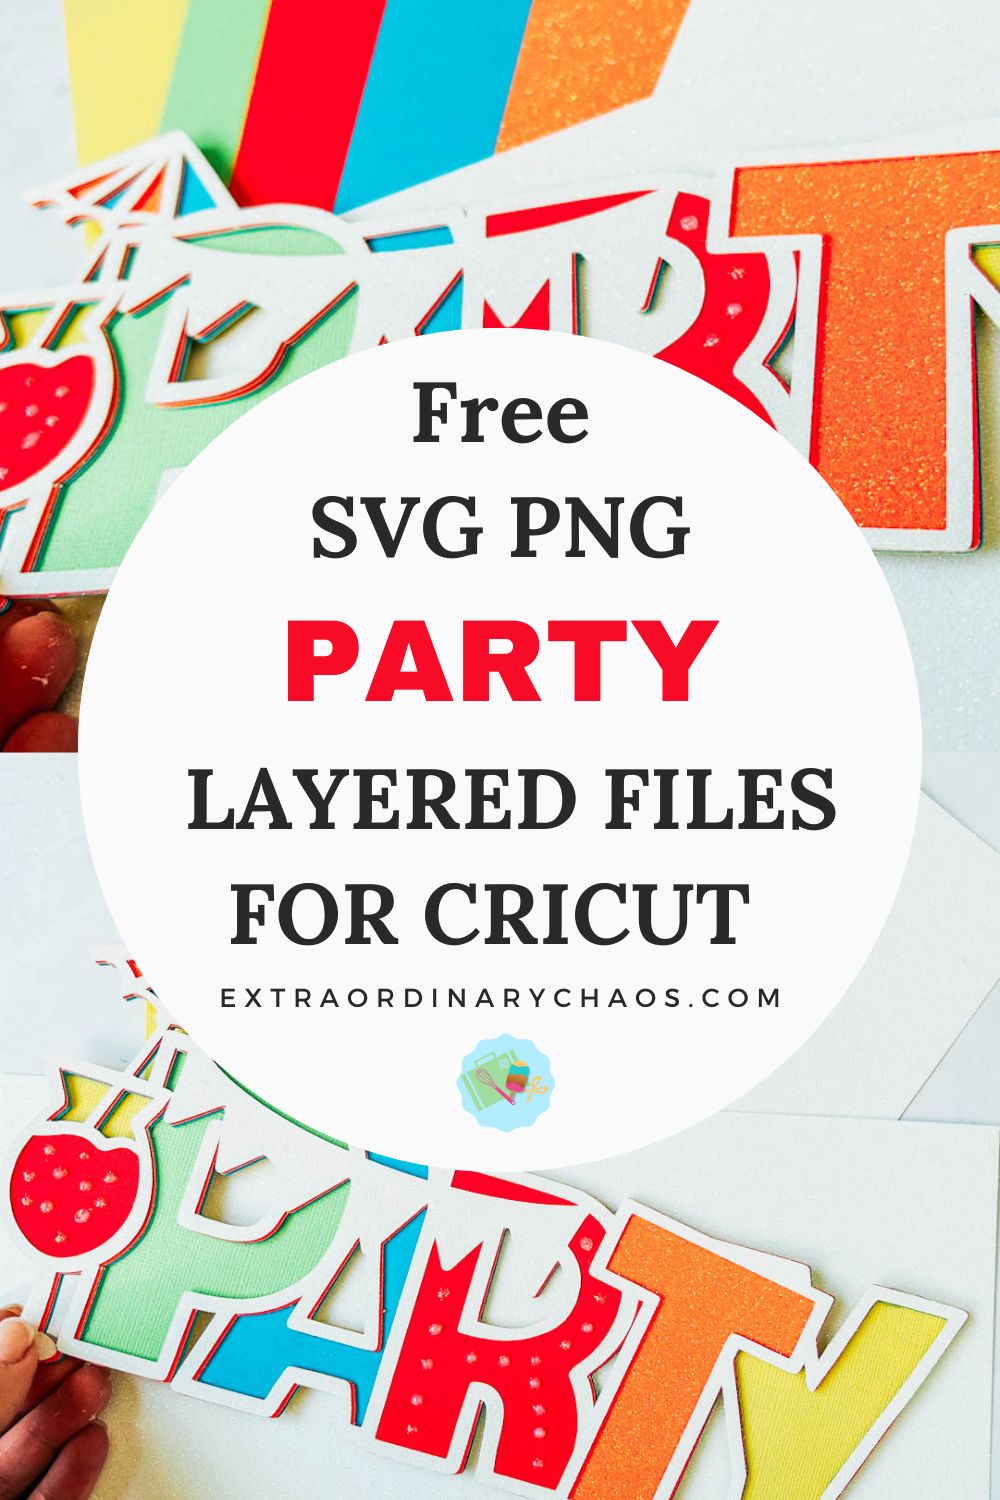 SVG Png FREE Party Layered Files For Cricut and Silhouette